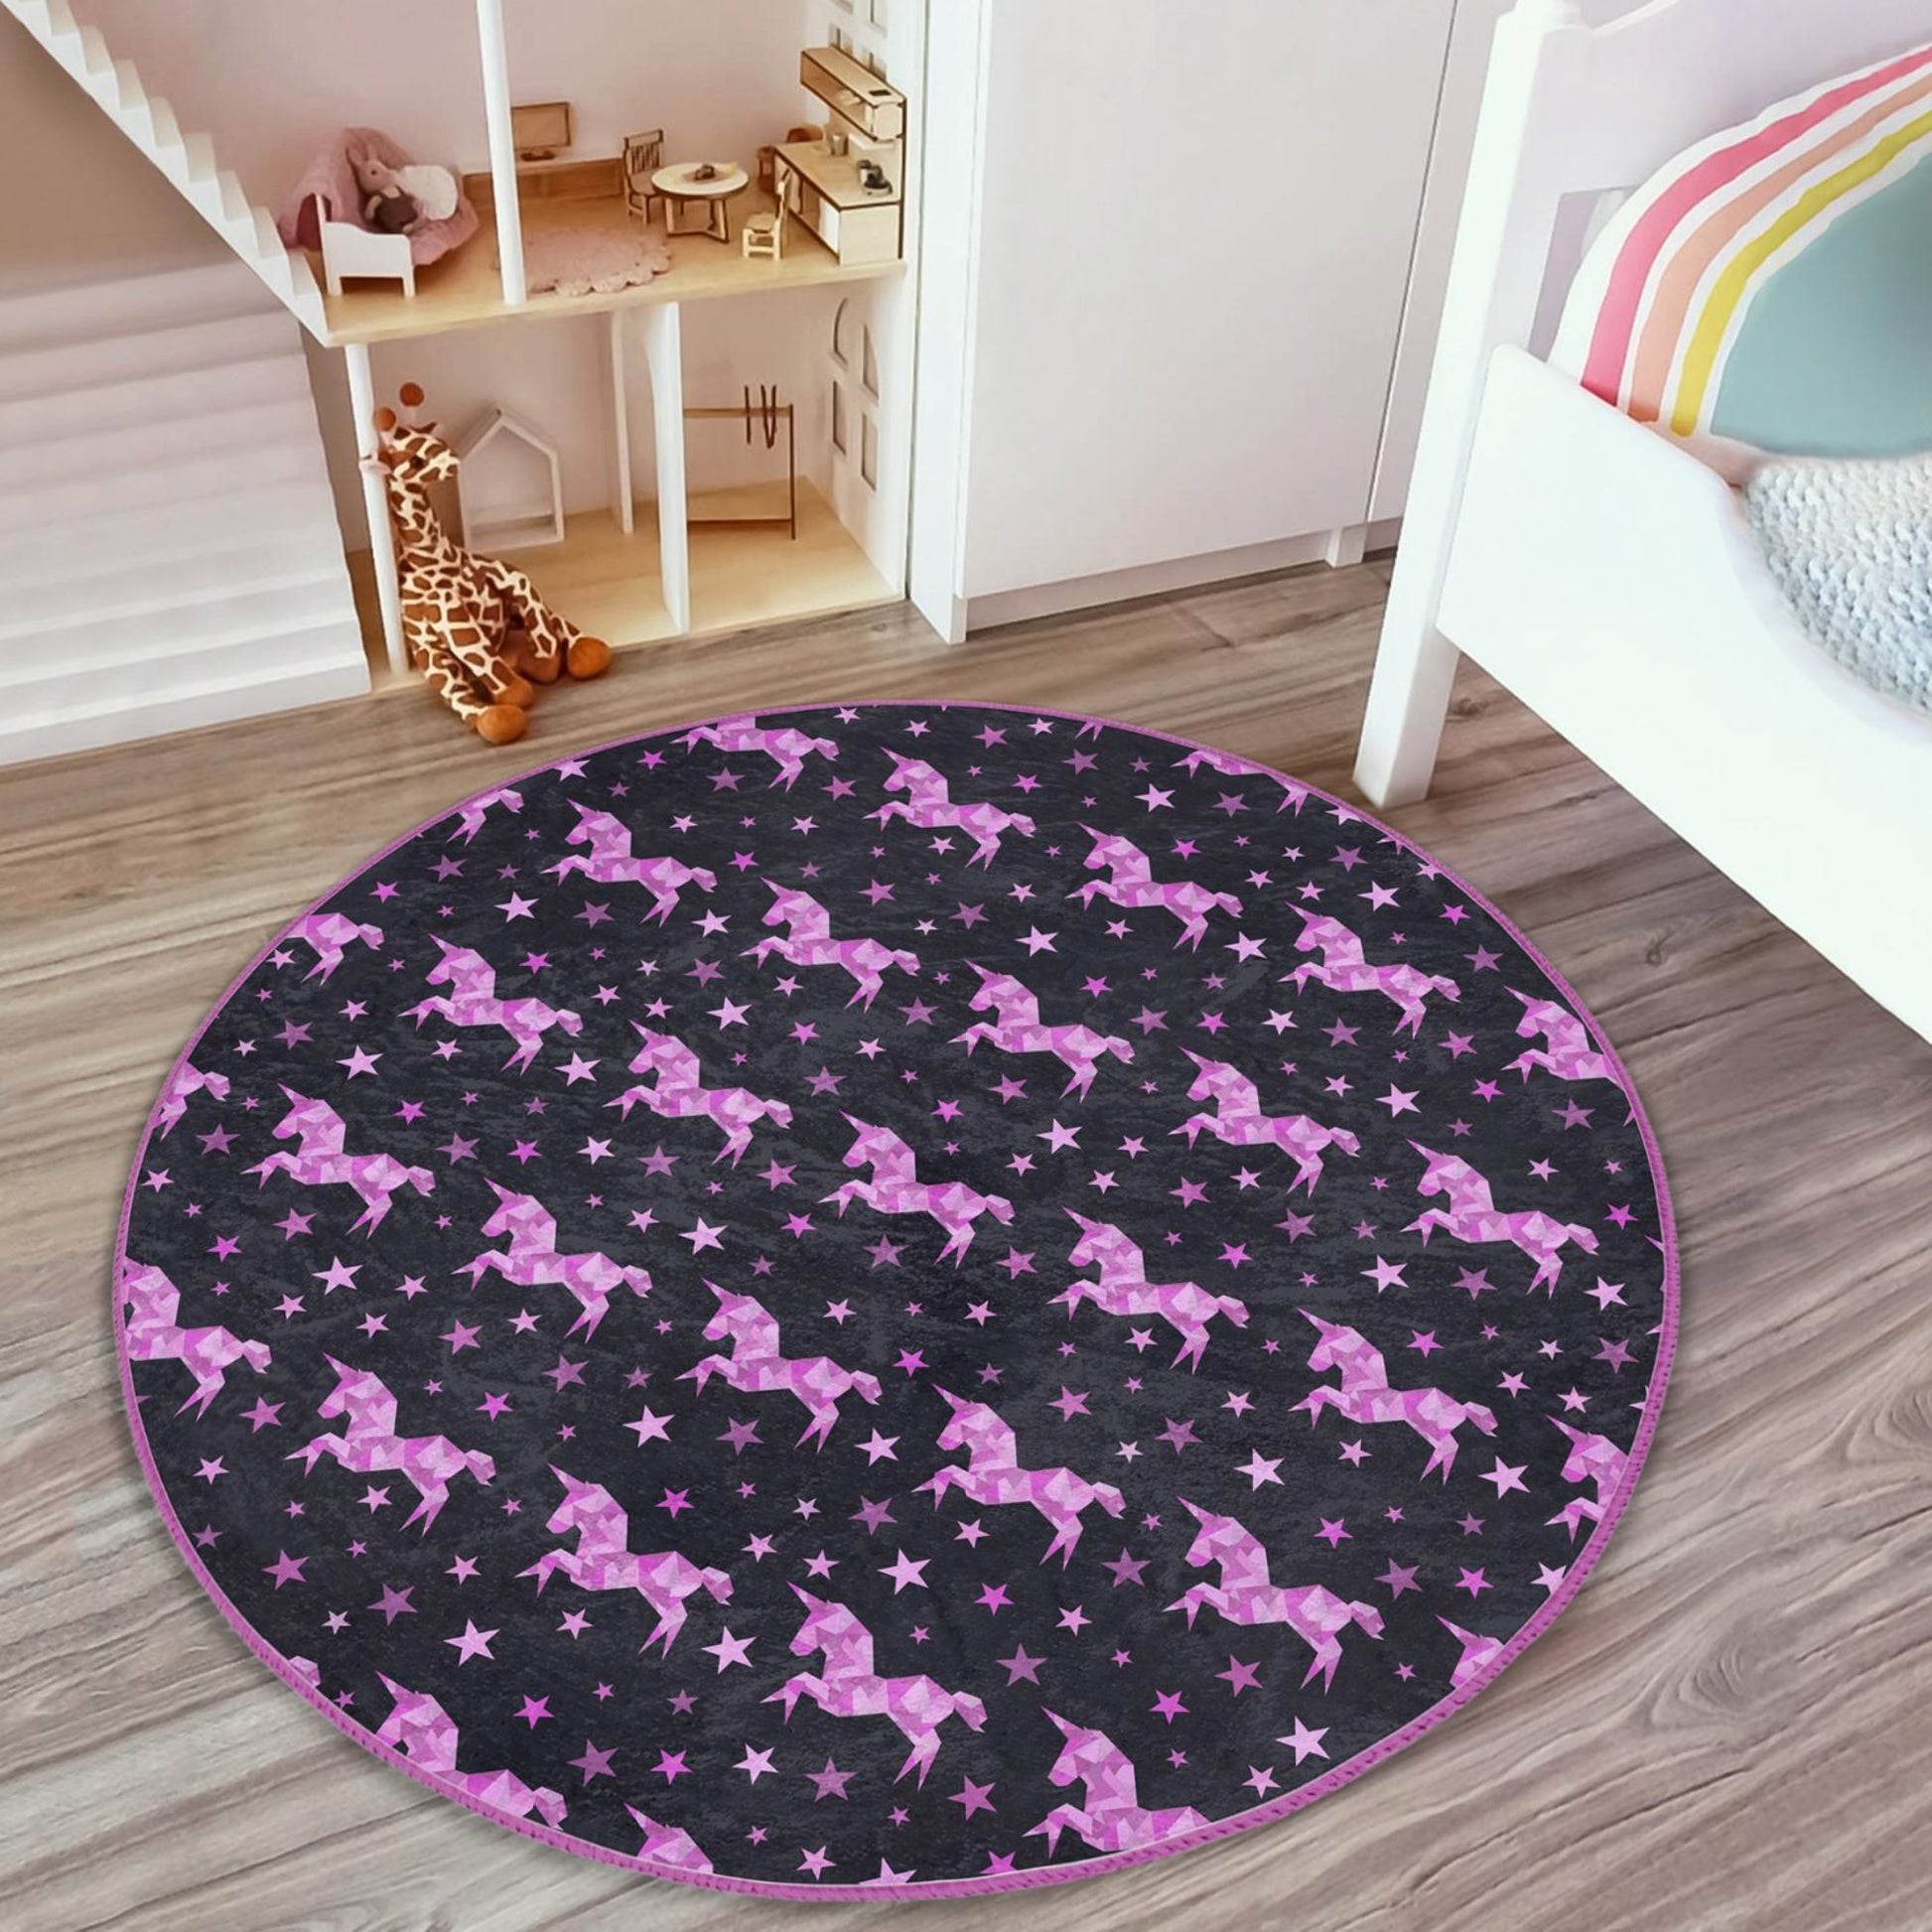 Rug with Unicorn Design for Kids' Play Area